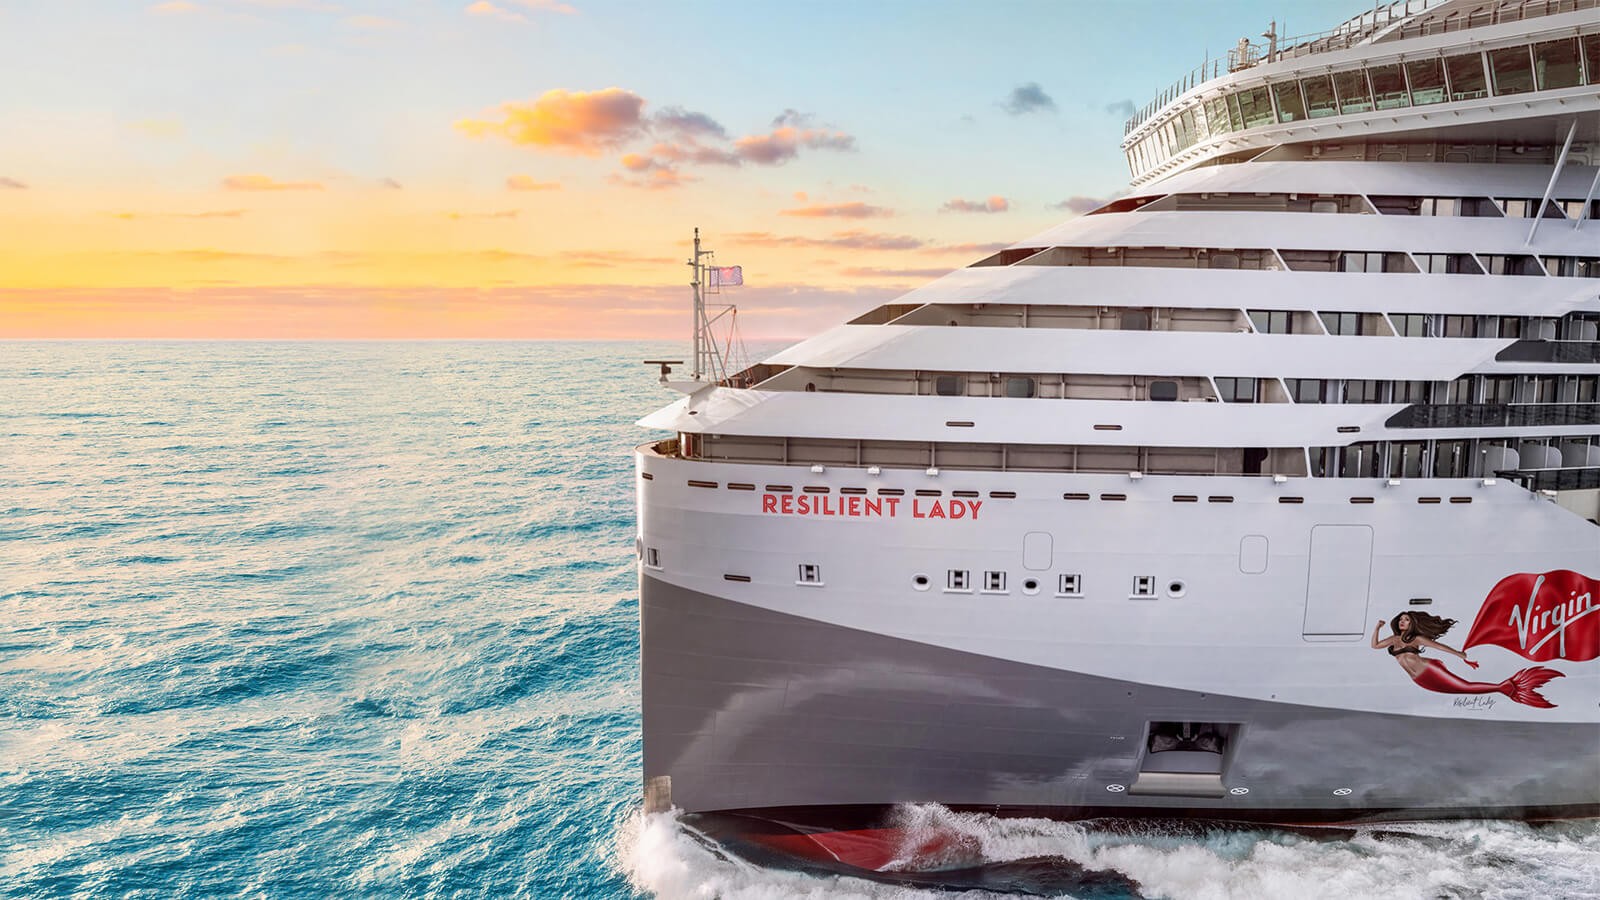 Resilient Lady is Virgin Voyages' new ship